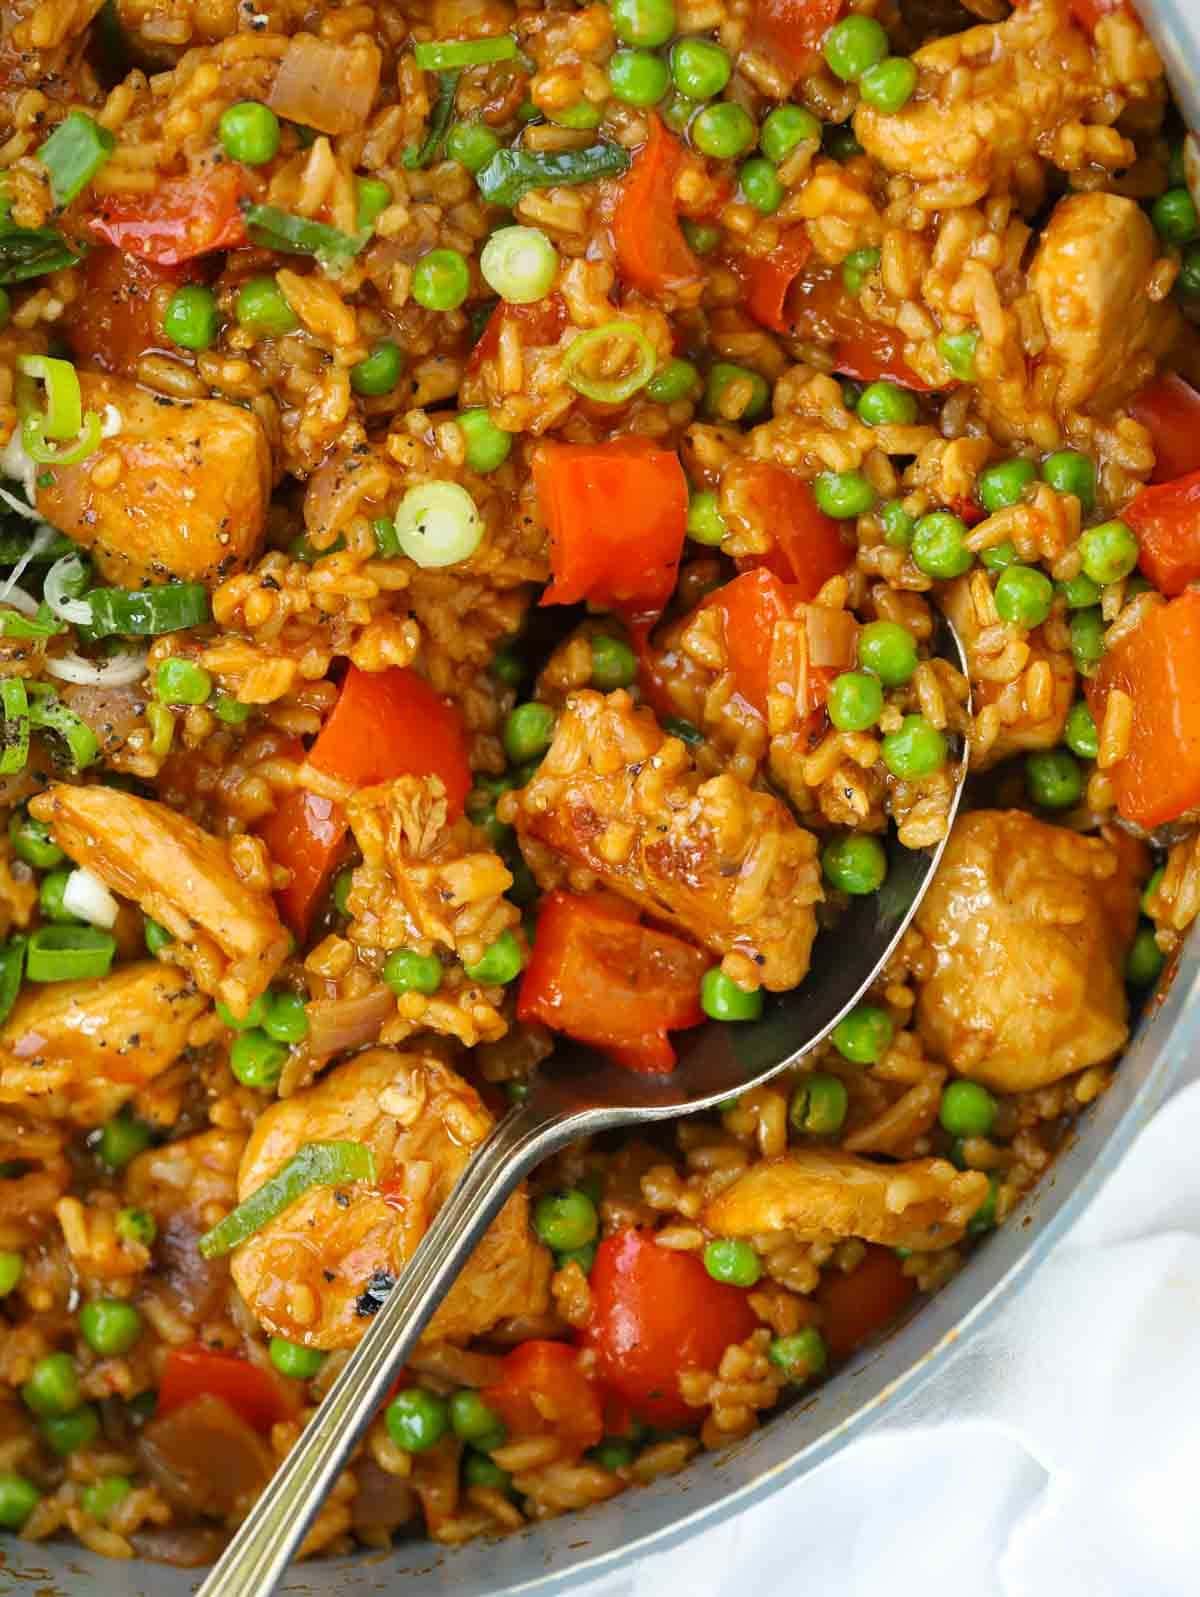 Chicken, vegetables and rice in a peri peri seasoning.